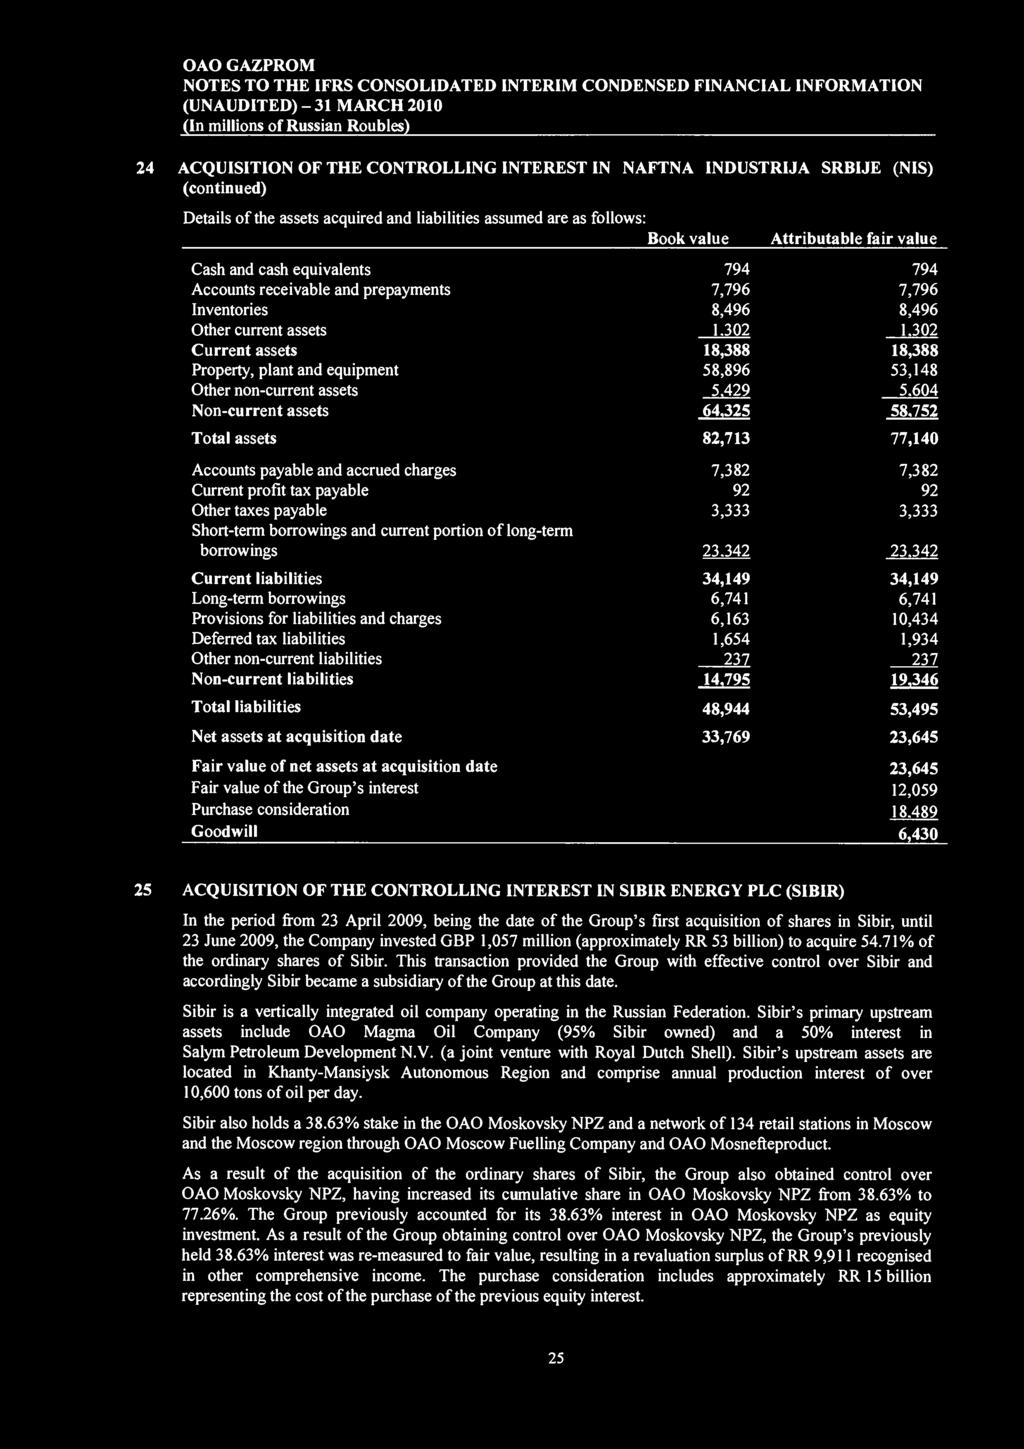 24 ACQUISITION OF THE CONTROLLING INTEREST IN NAFTNA INDUSTRIJA SRBIJE (NIS) (continued) Details of the assets acquired and liabilities assumed are as follows: Book value Attributable fair value Cash